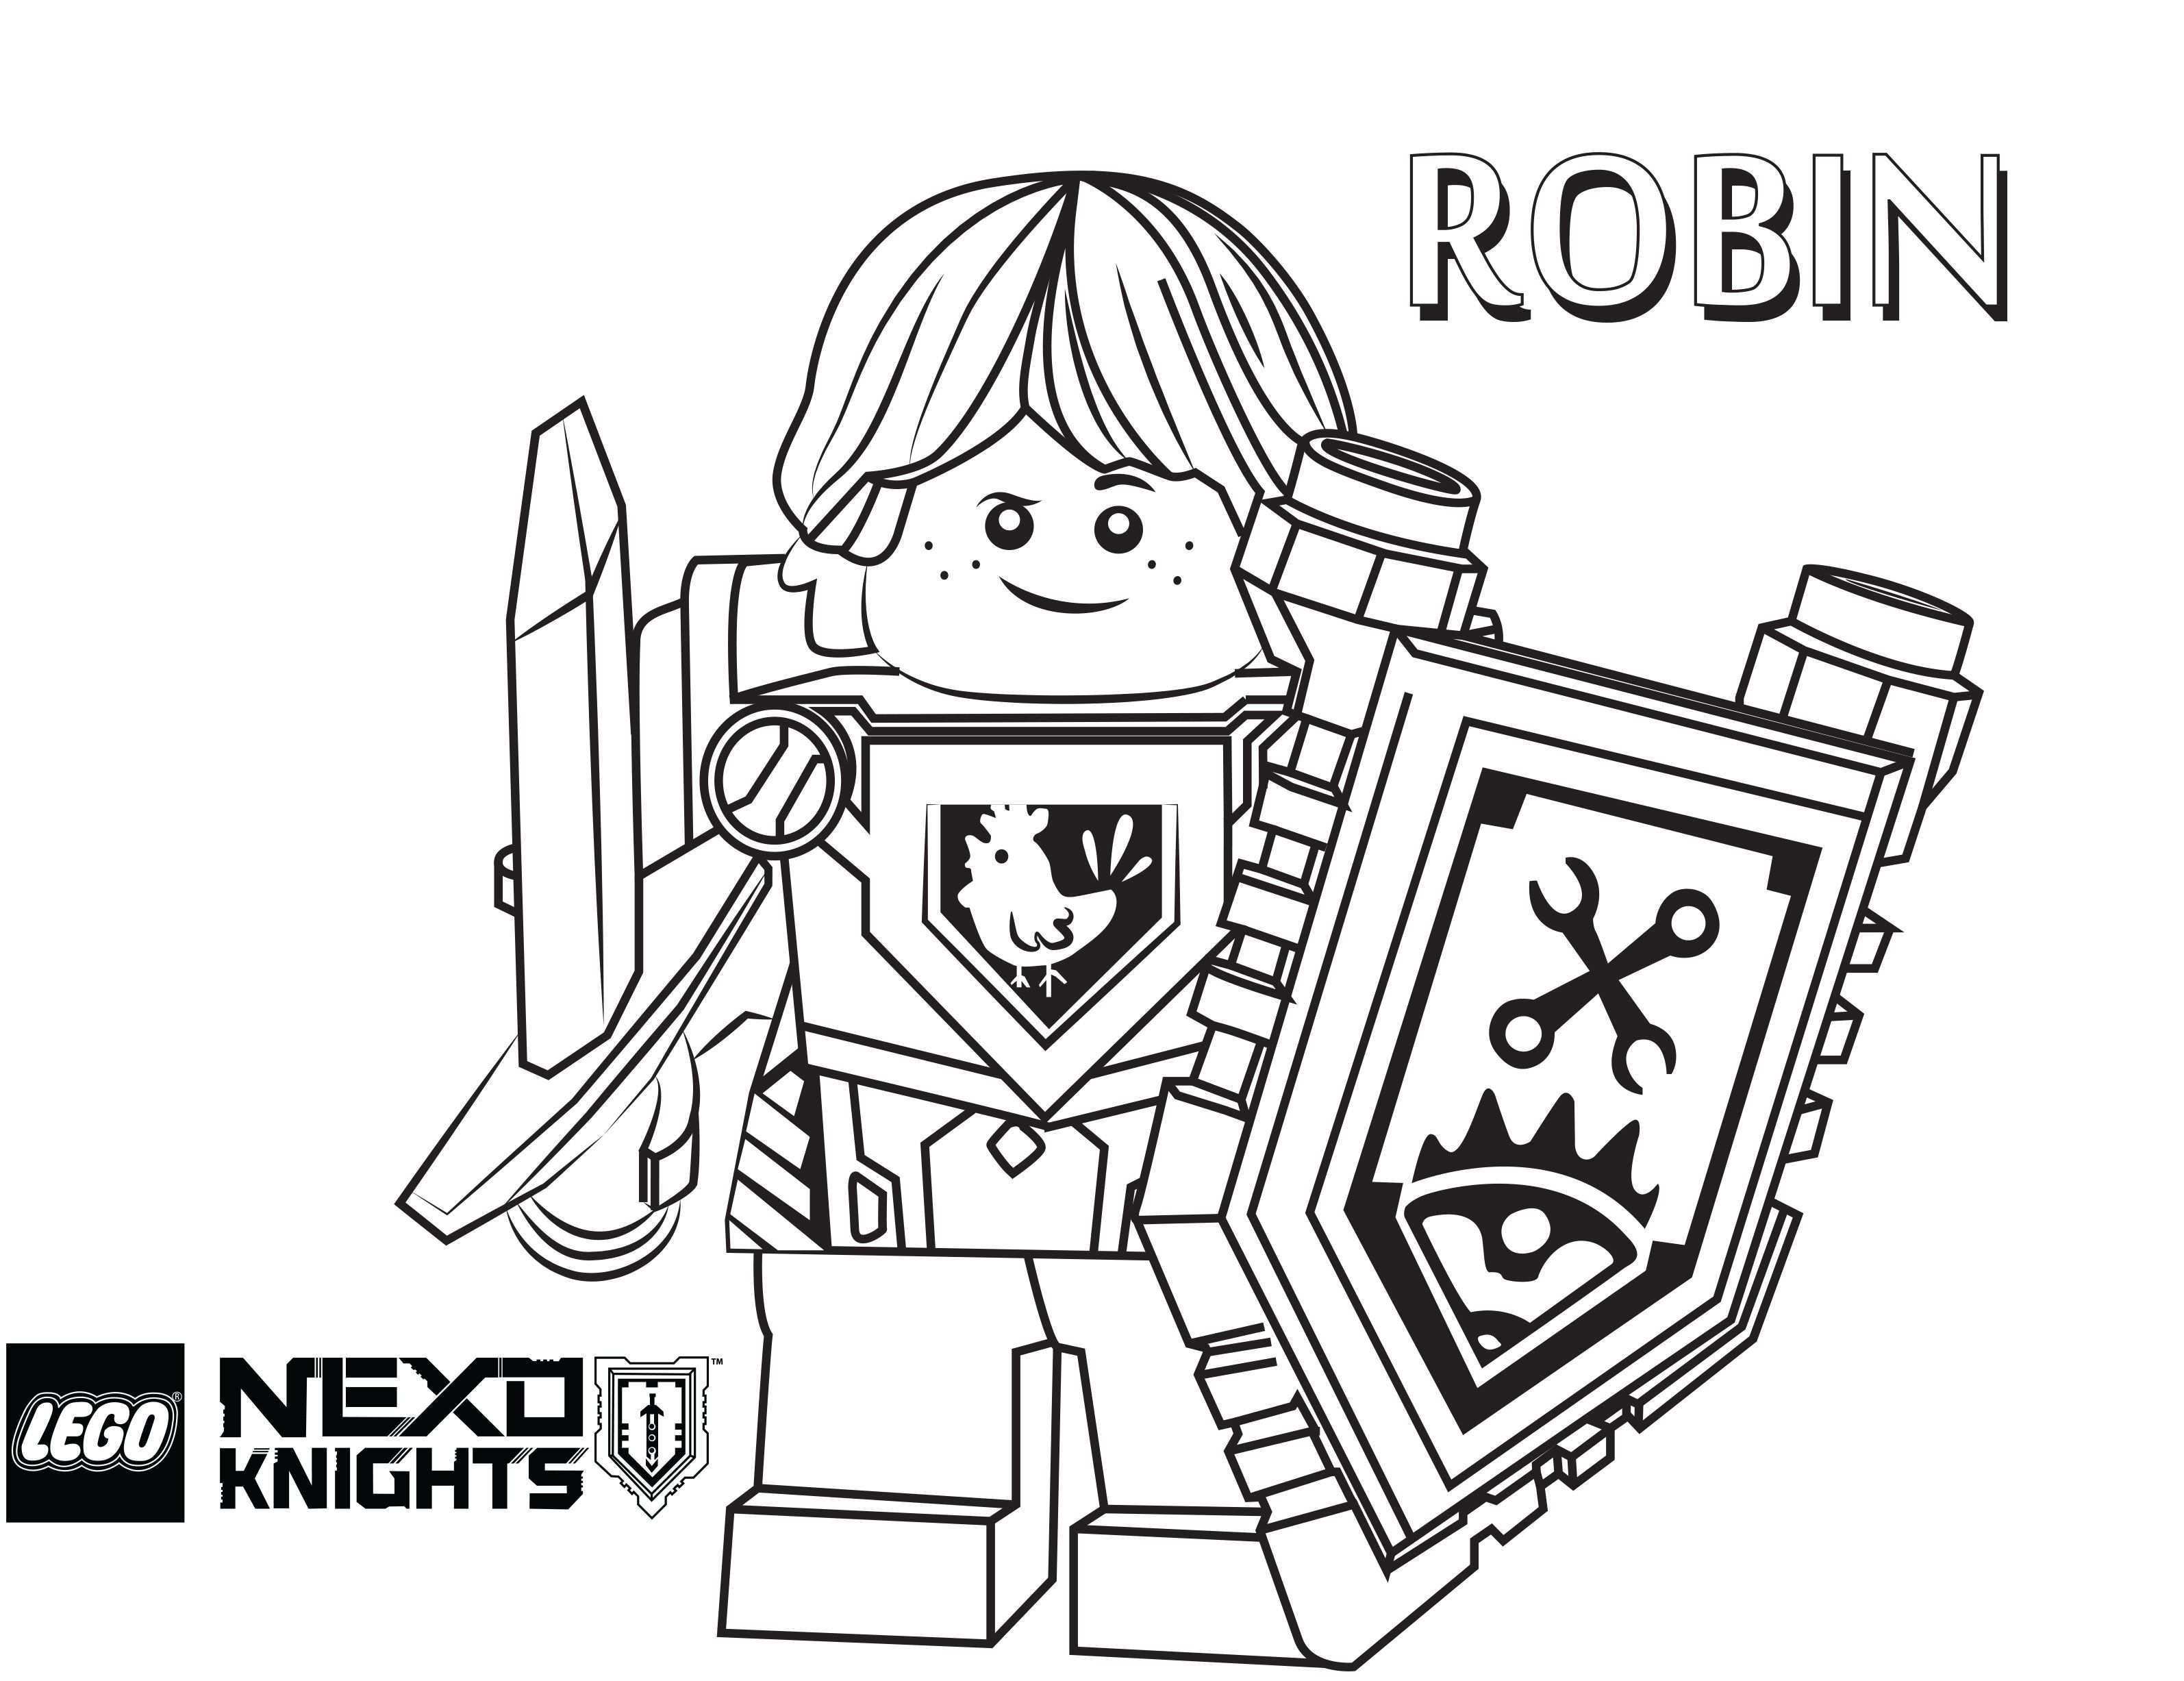 Lego Nexo Knights Coloring Pages Free Printable Lego Nexo